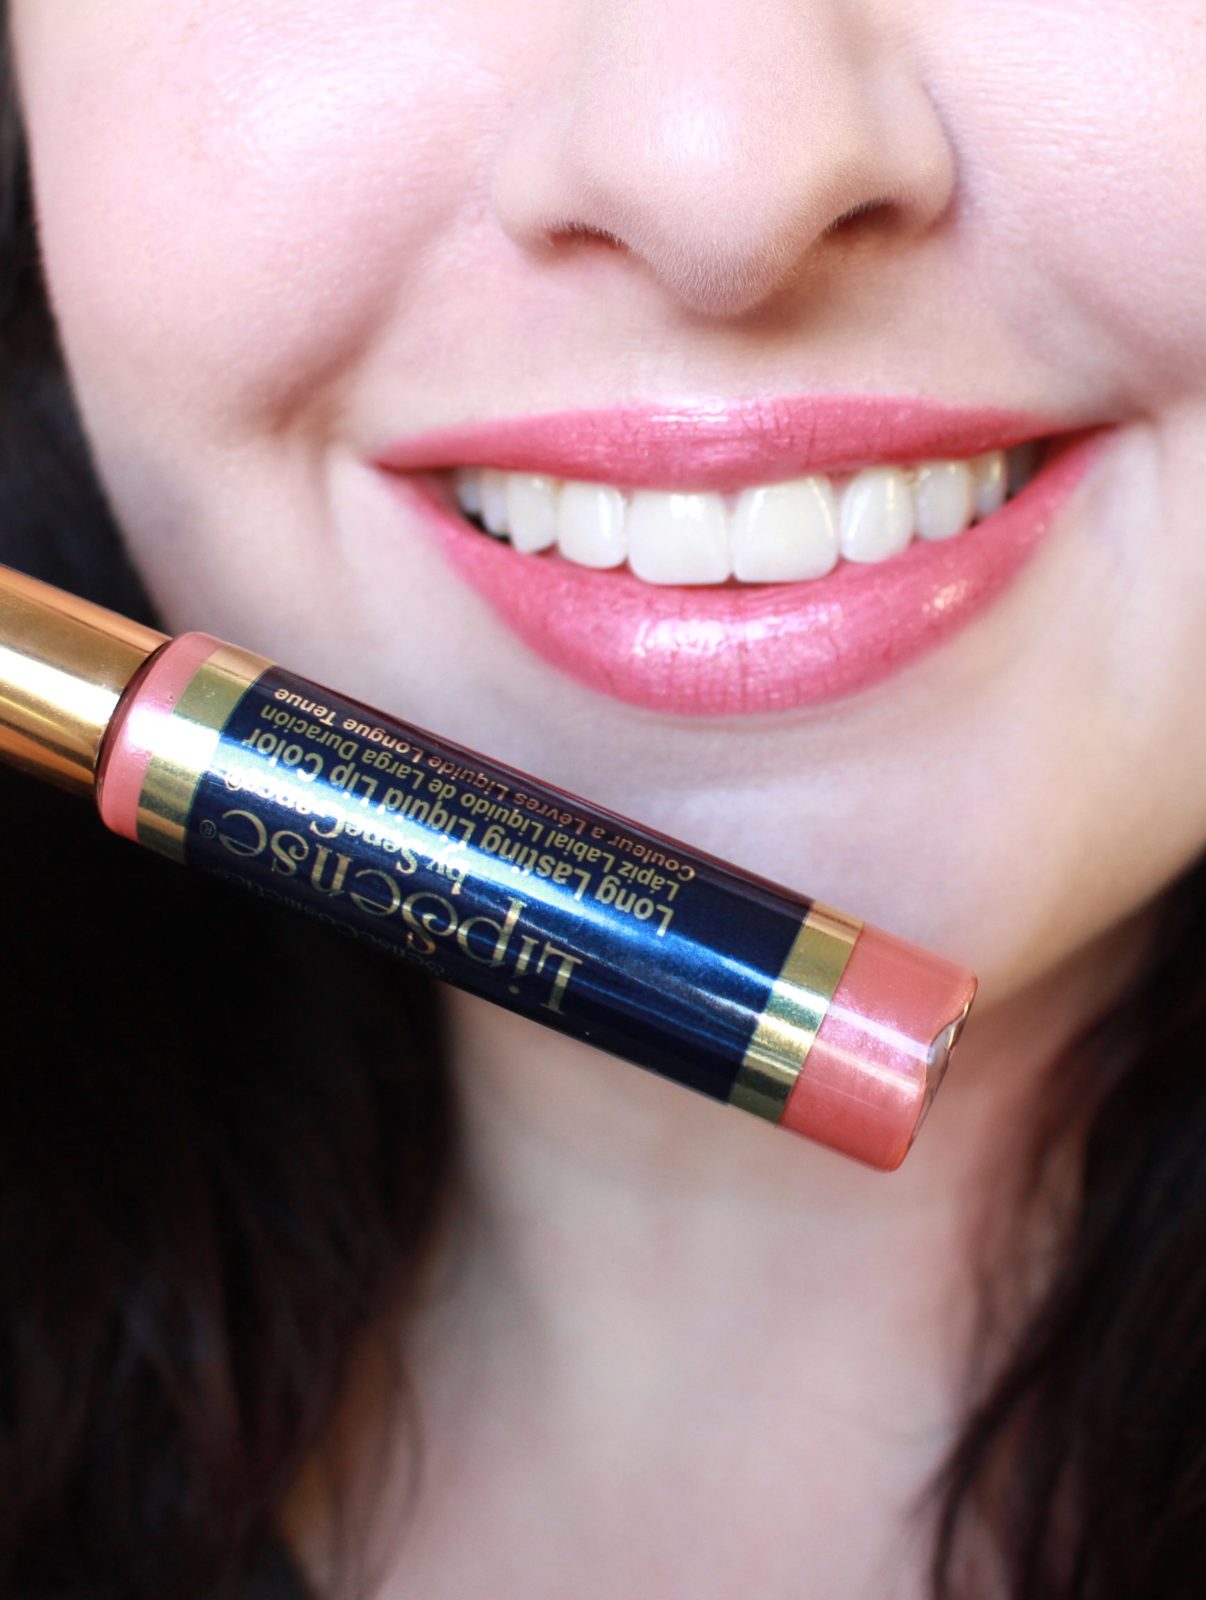 The LipSense Review you have been waiting for! I recently got my hands on some LipSense lip colors from Bombshell Cosmetics, and I couldn't wait to try them on for you!  - LipSense Bombshell Review by popular Los Angeles cruelty free beauty blogger My Beauty Bunny